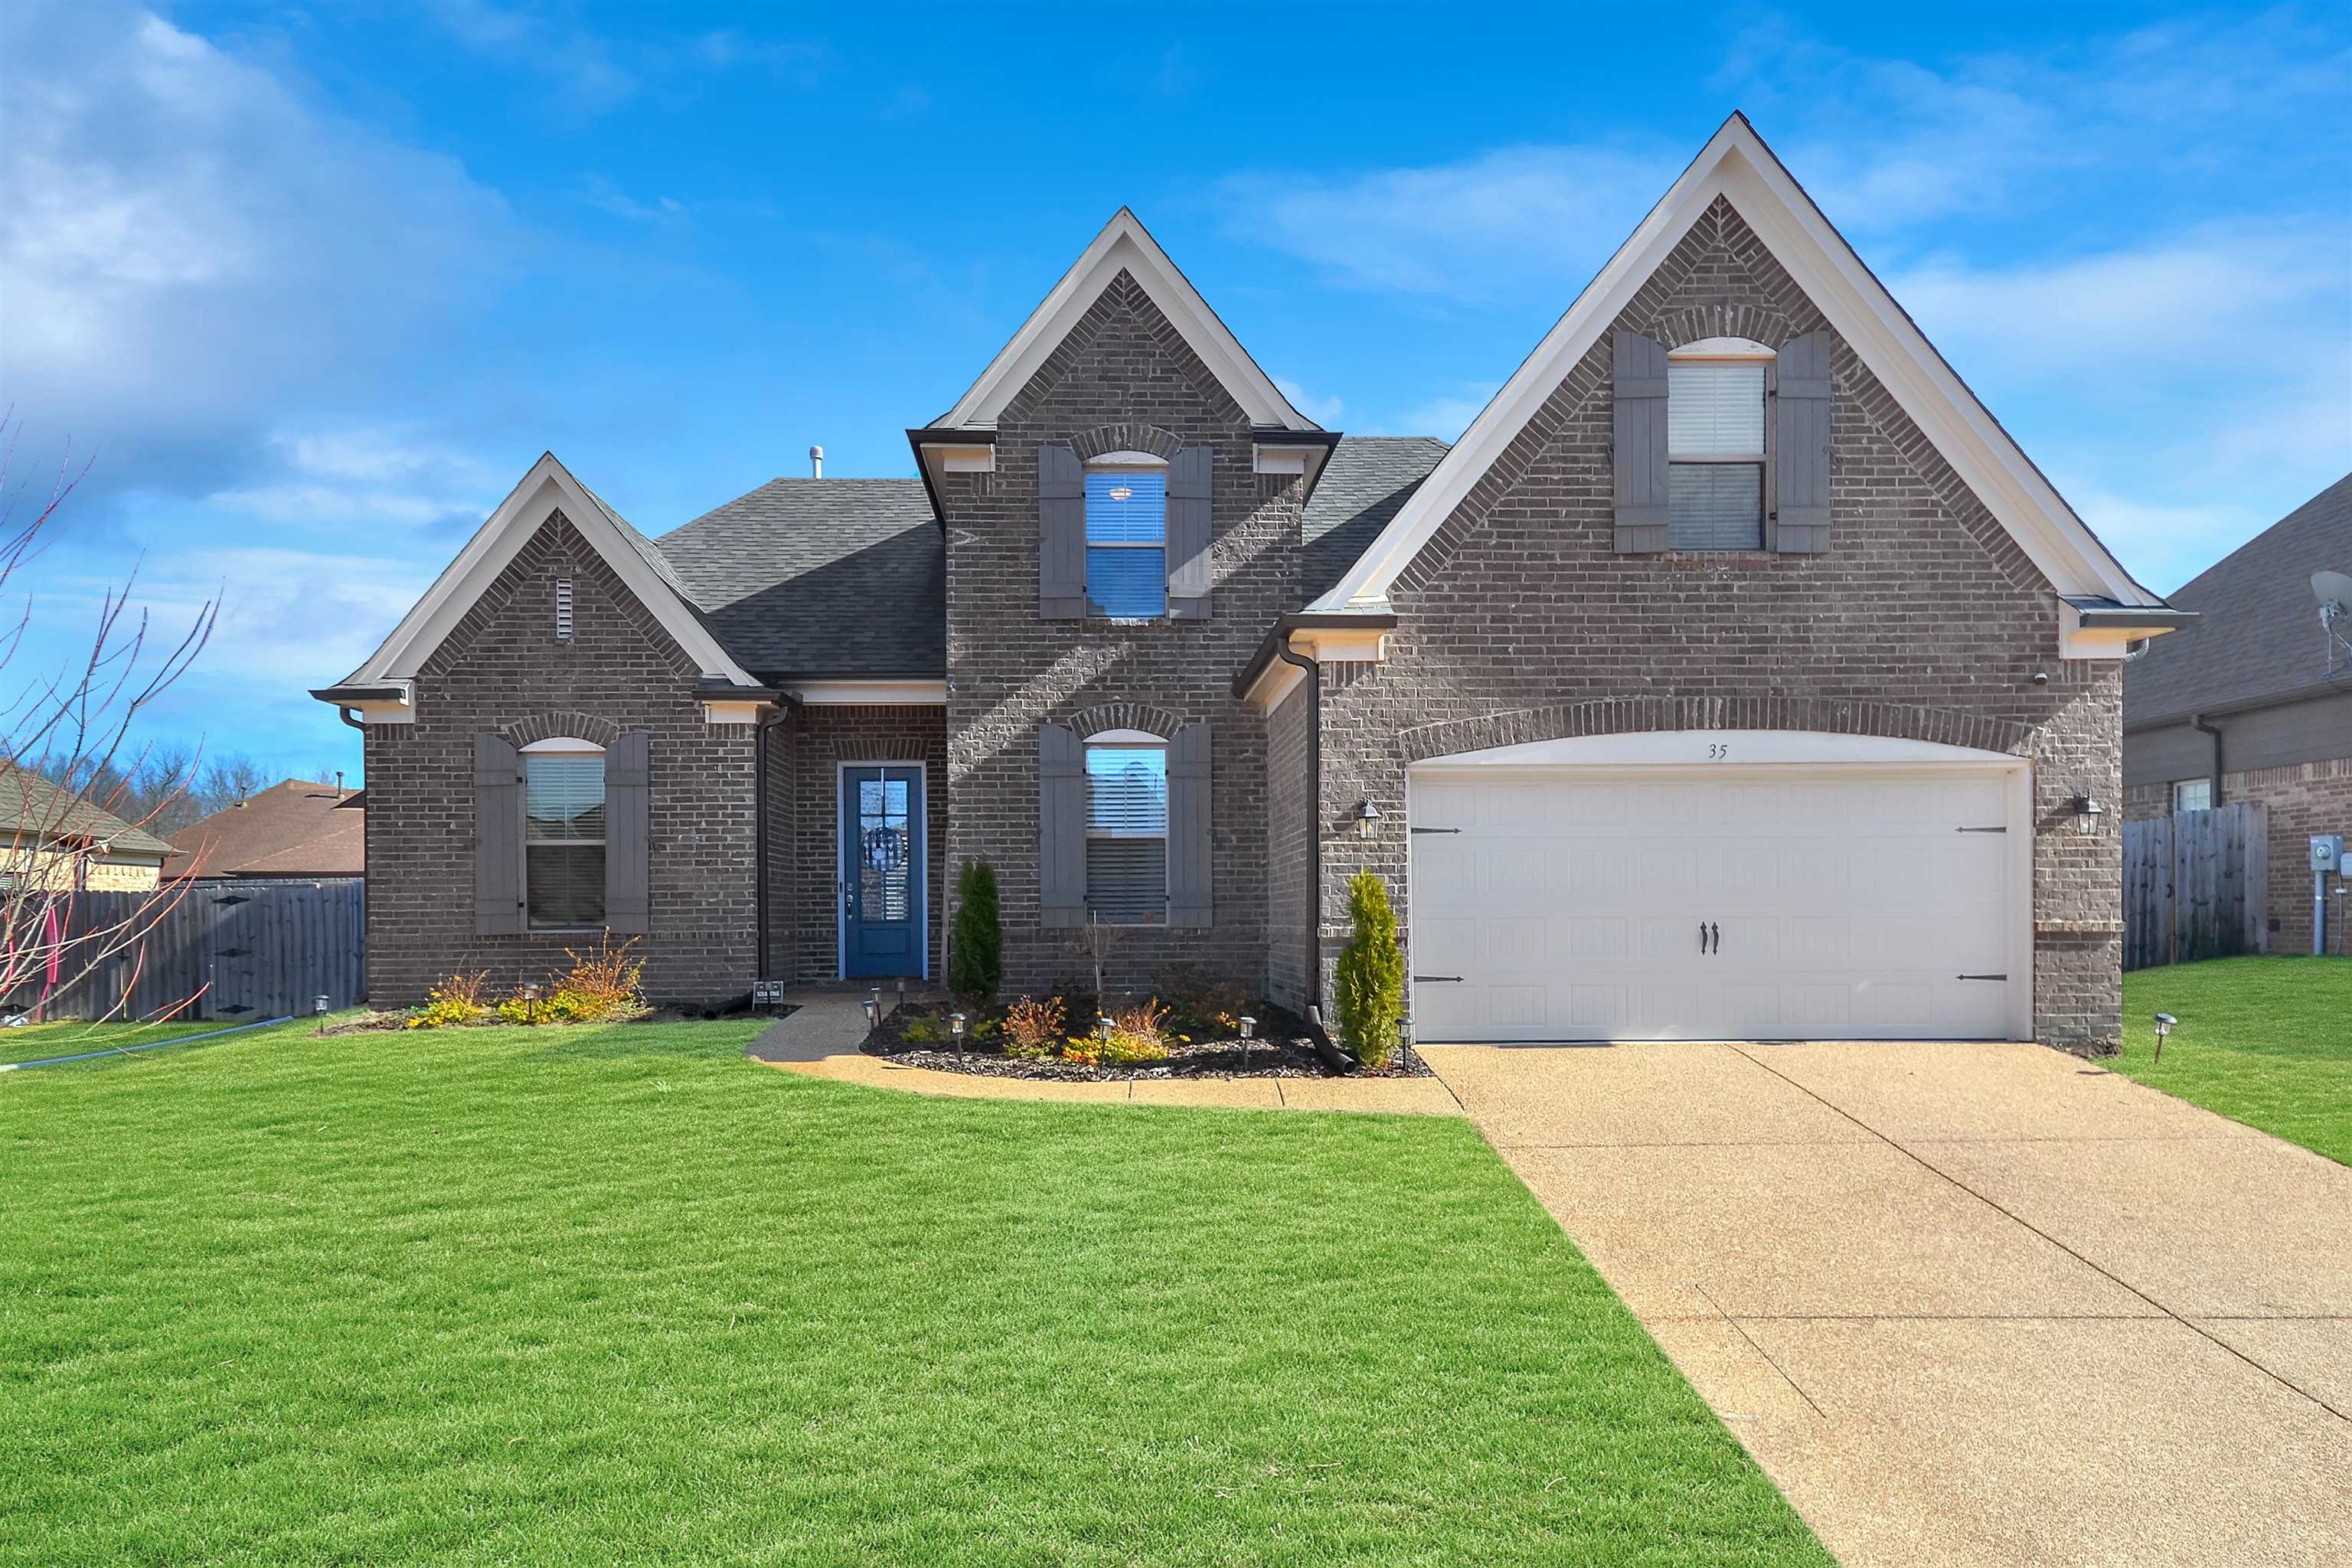 Great curb appeal and low maintenance exterior.